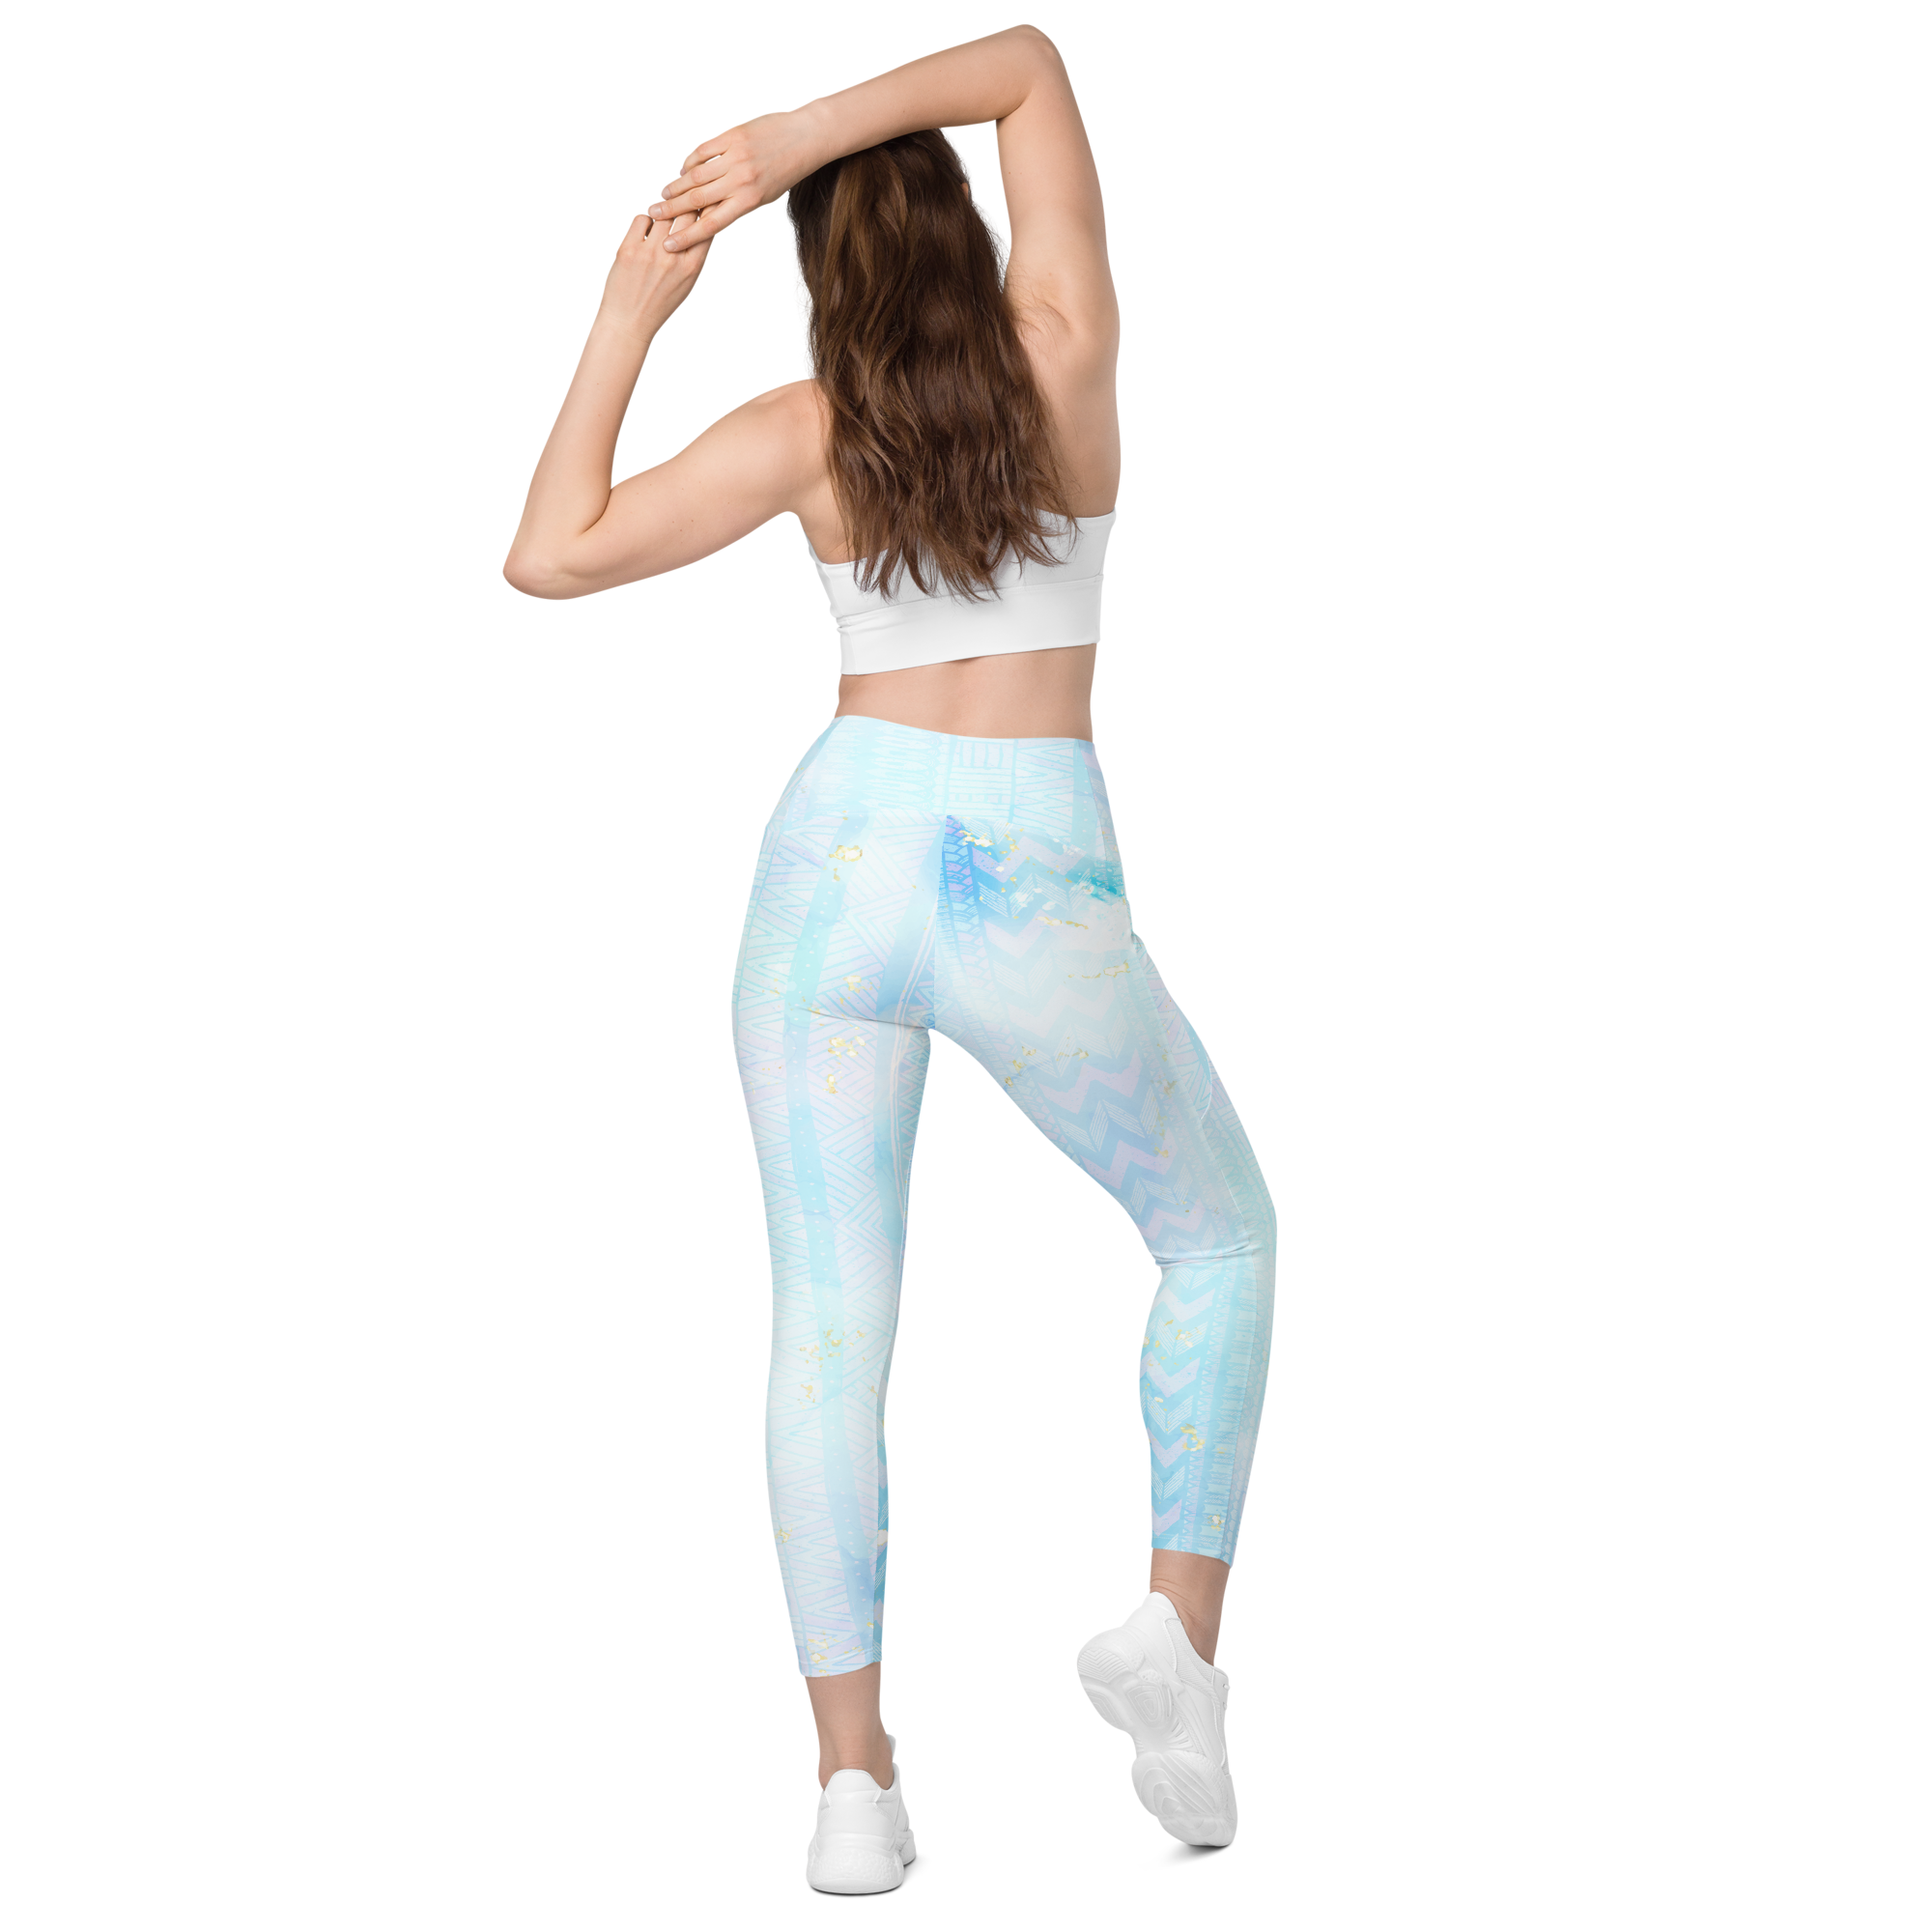 Just dropped! Chakra 1 Leggings with pockets